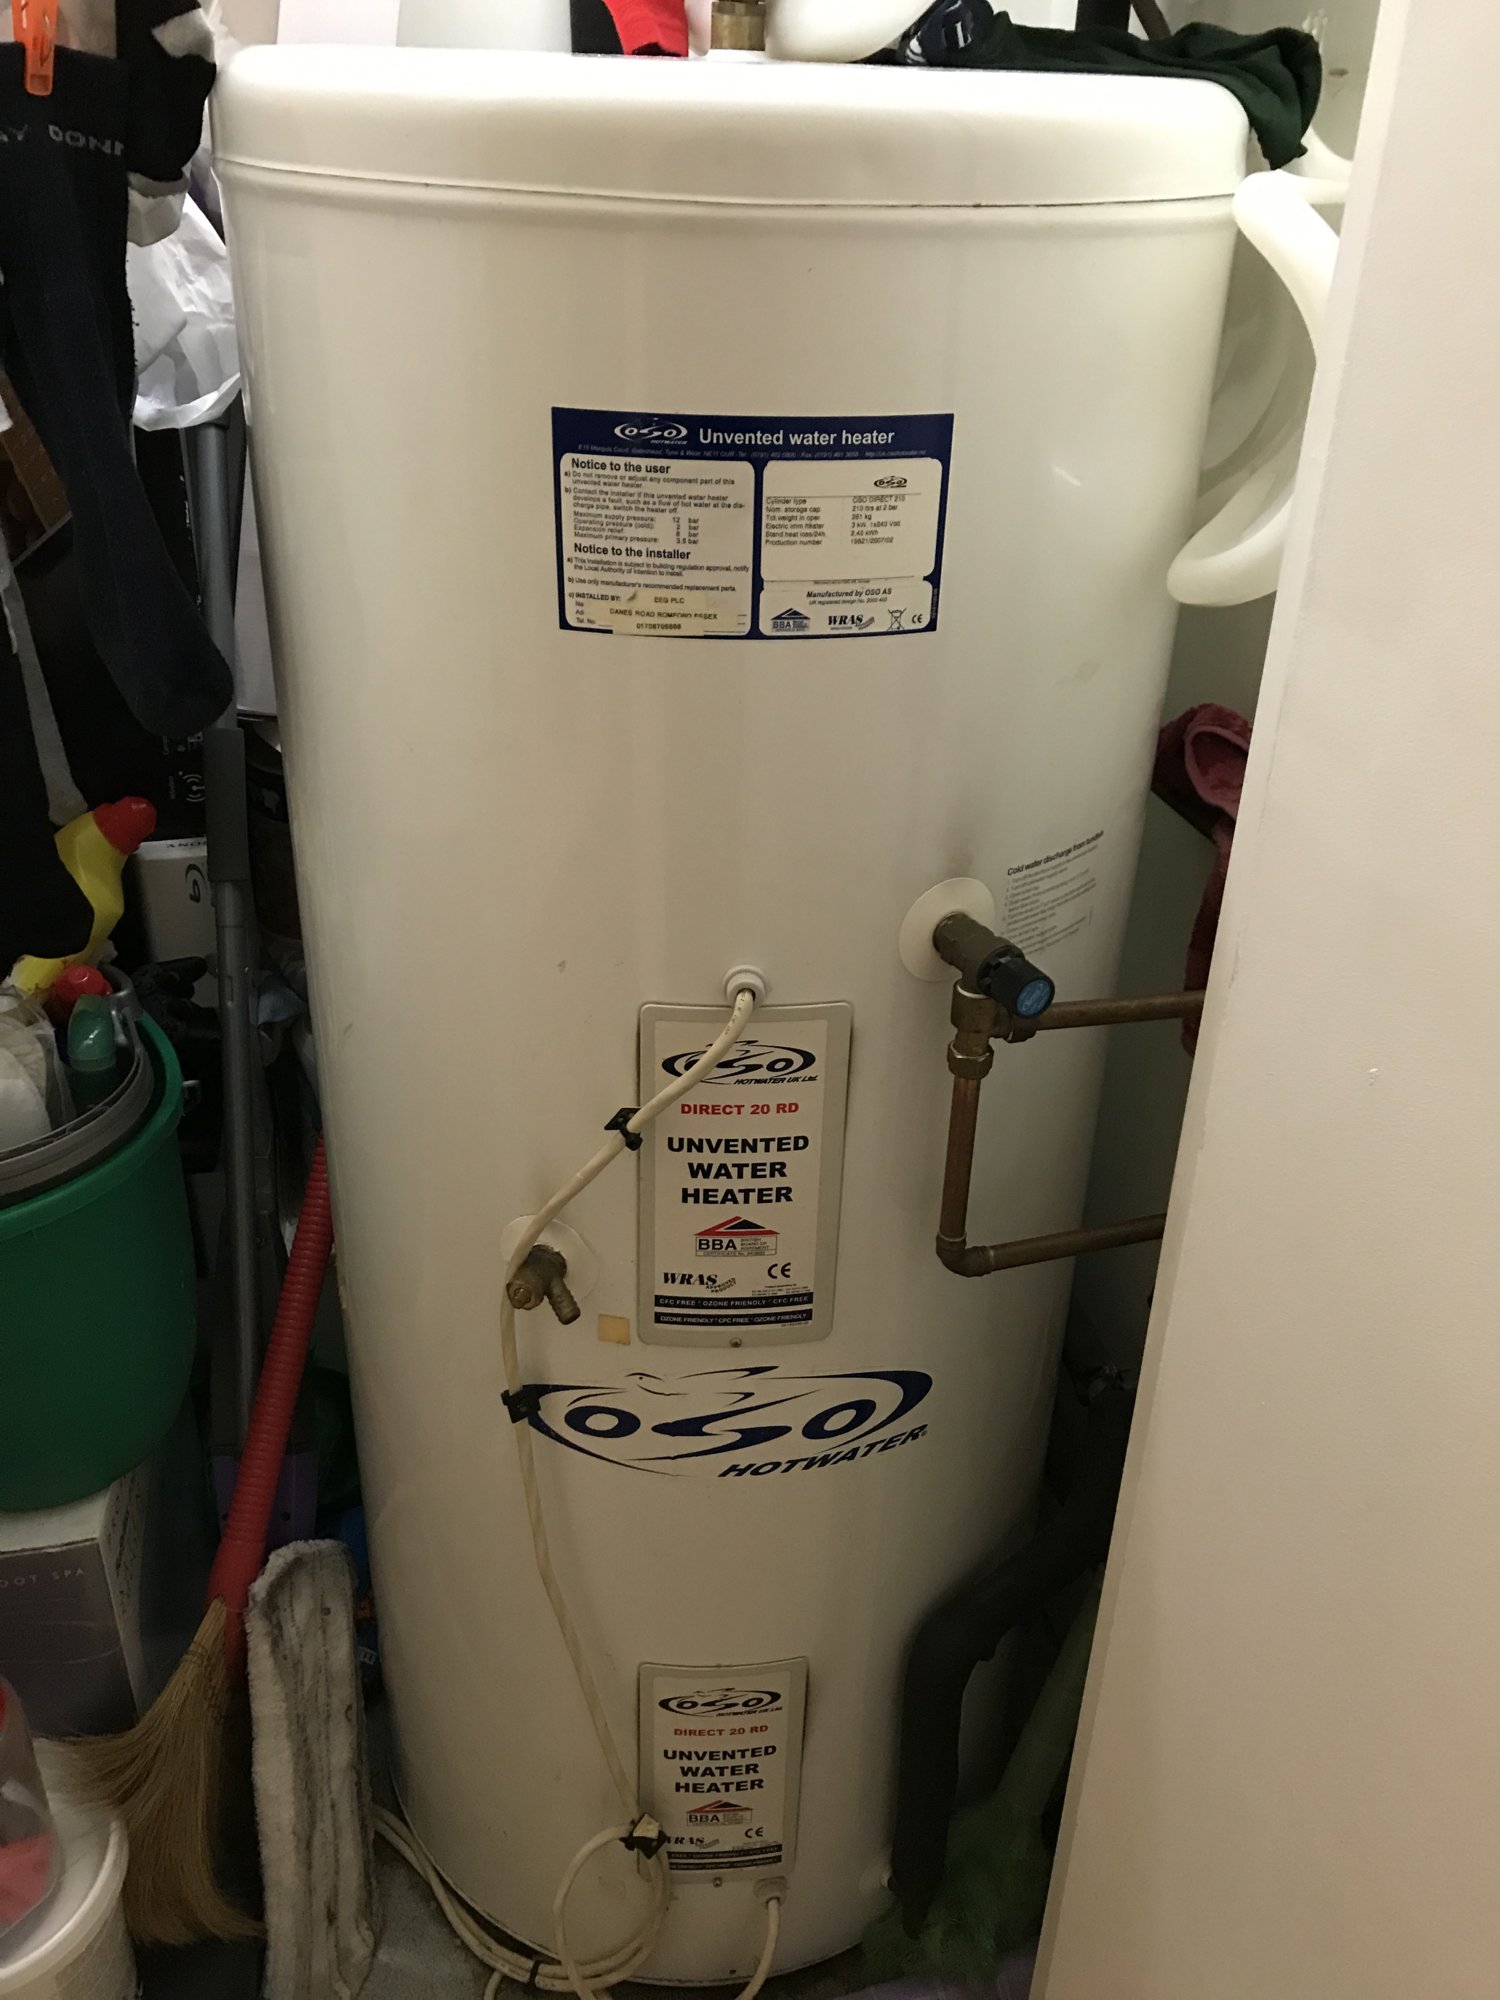 OSO unvented water heater